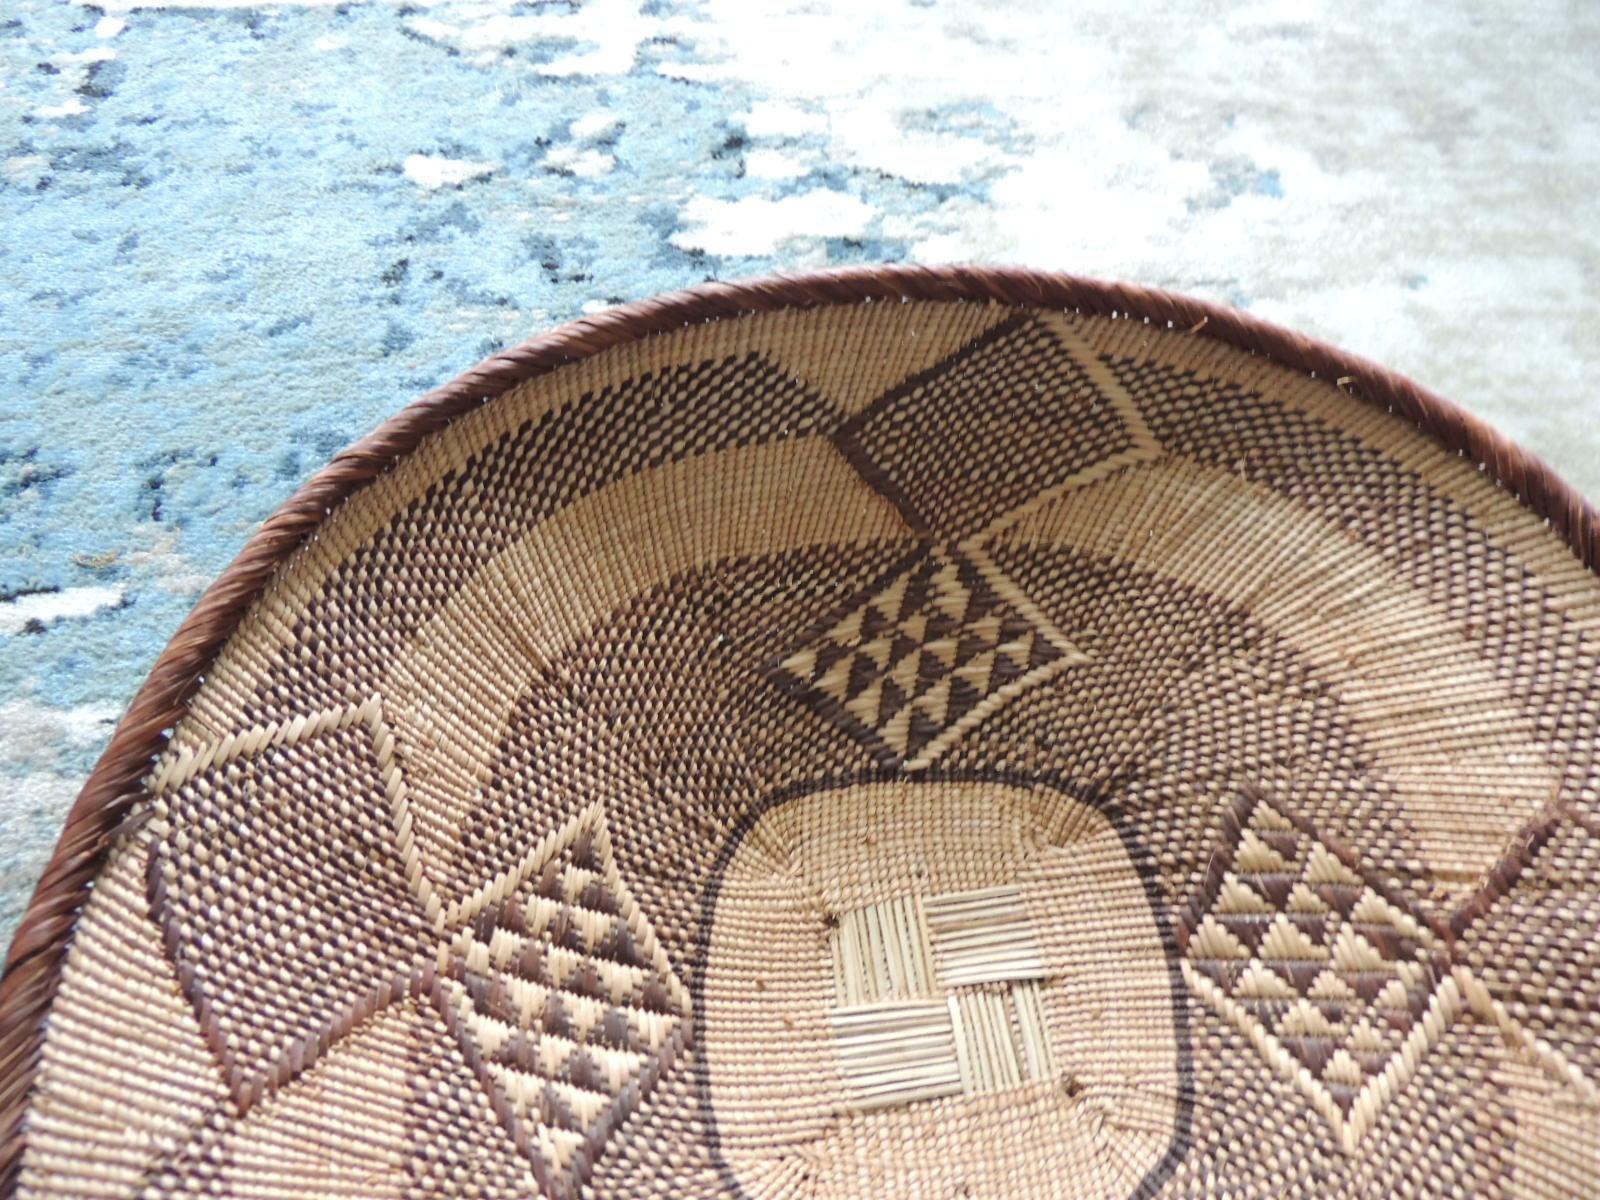 Vintage tribal tan and brown woven round African basket.
Tribal woven pattern.
Size: 17.5